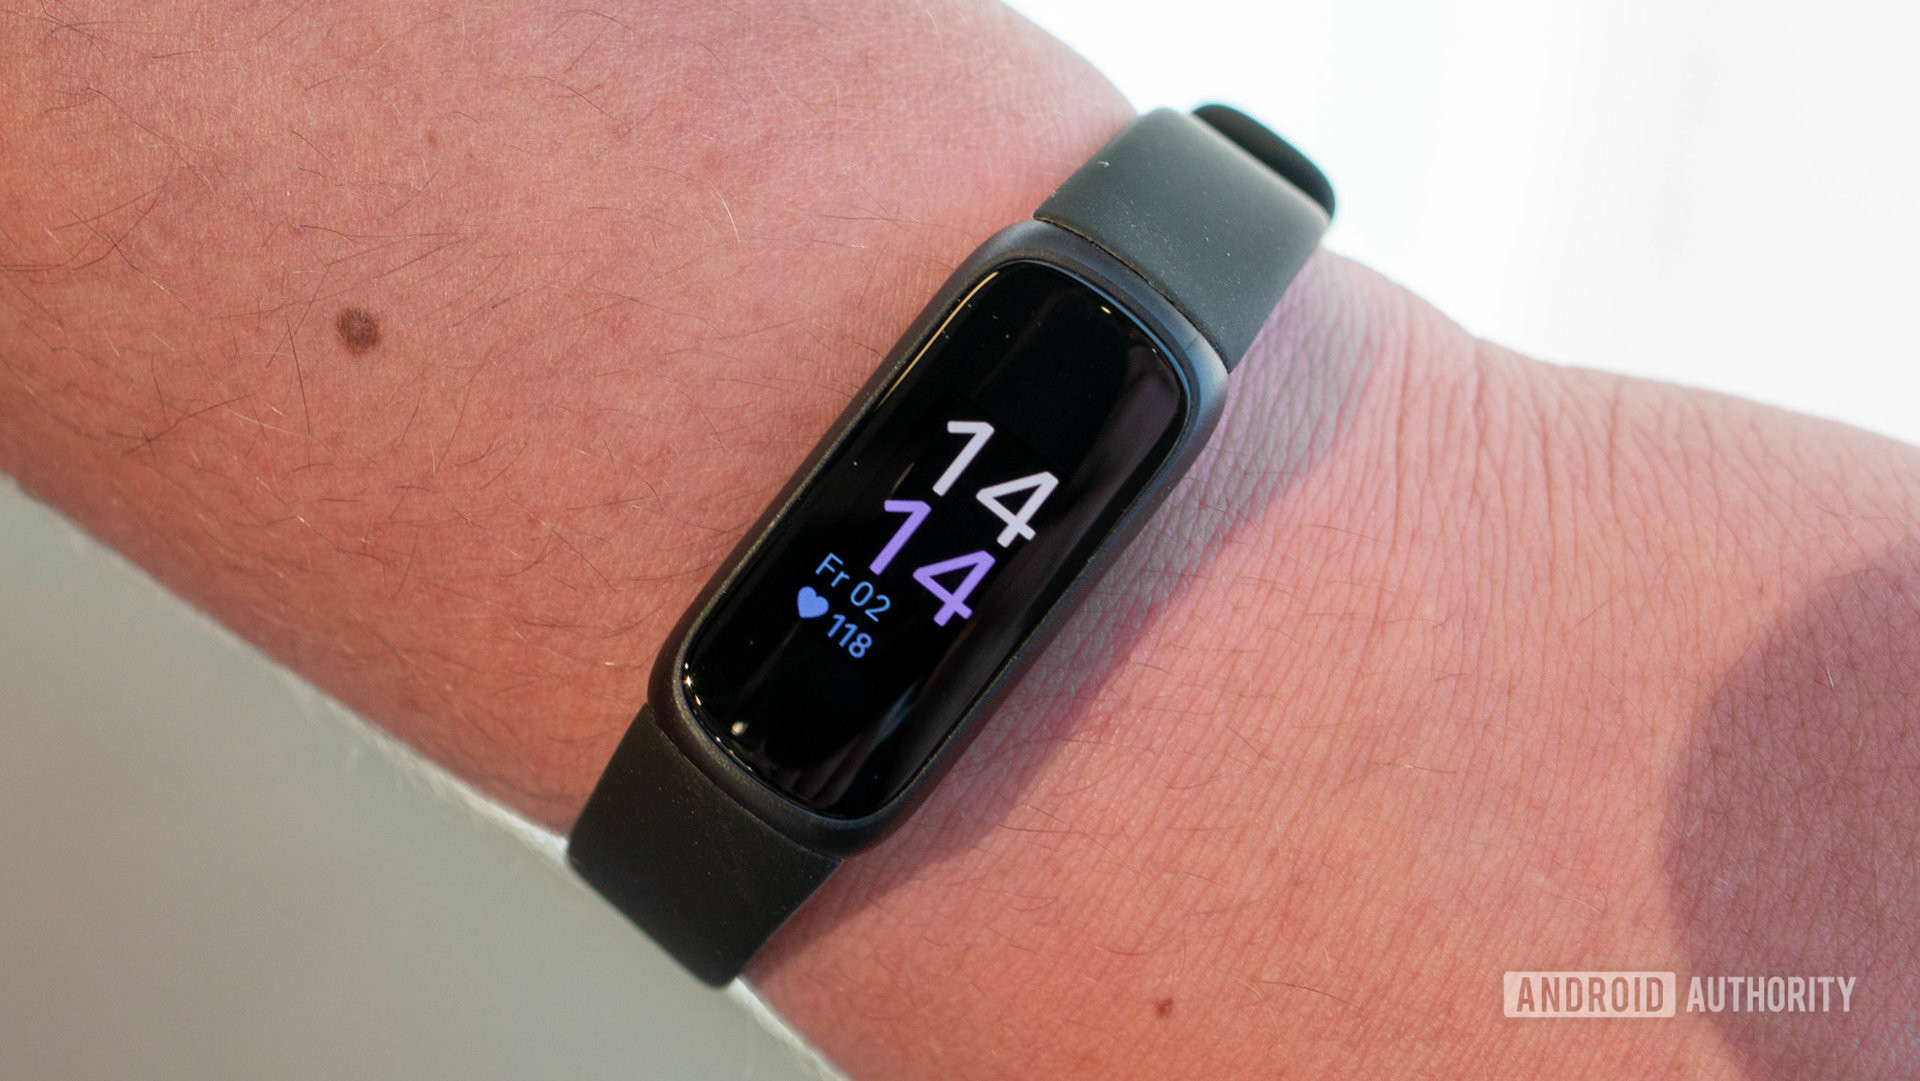 Displays the Fitbit Inspire 3 home screen on the user's wrist.